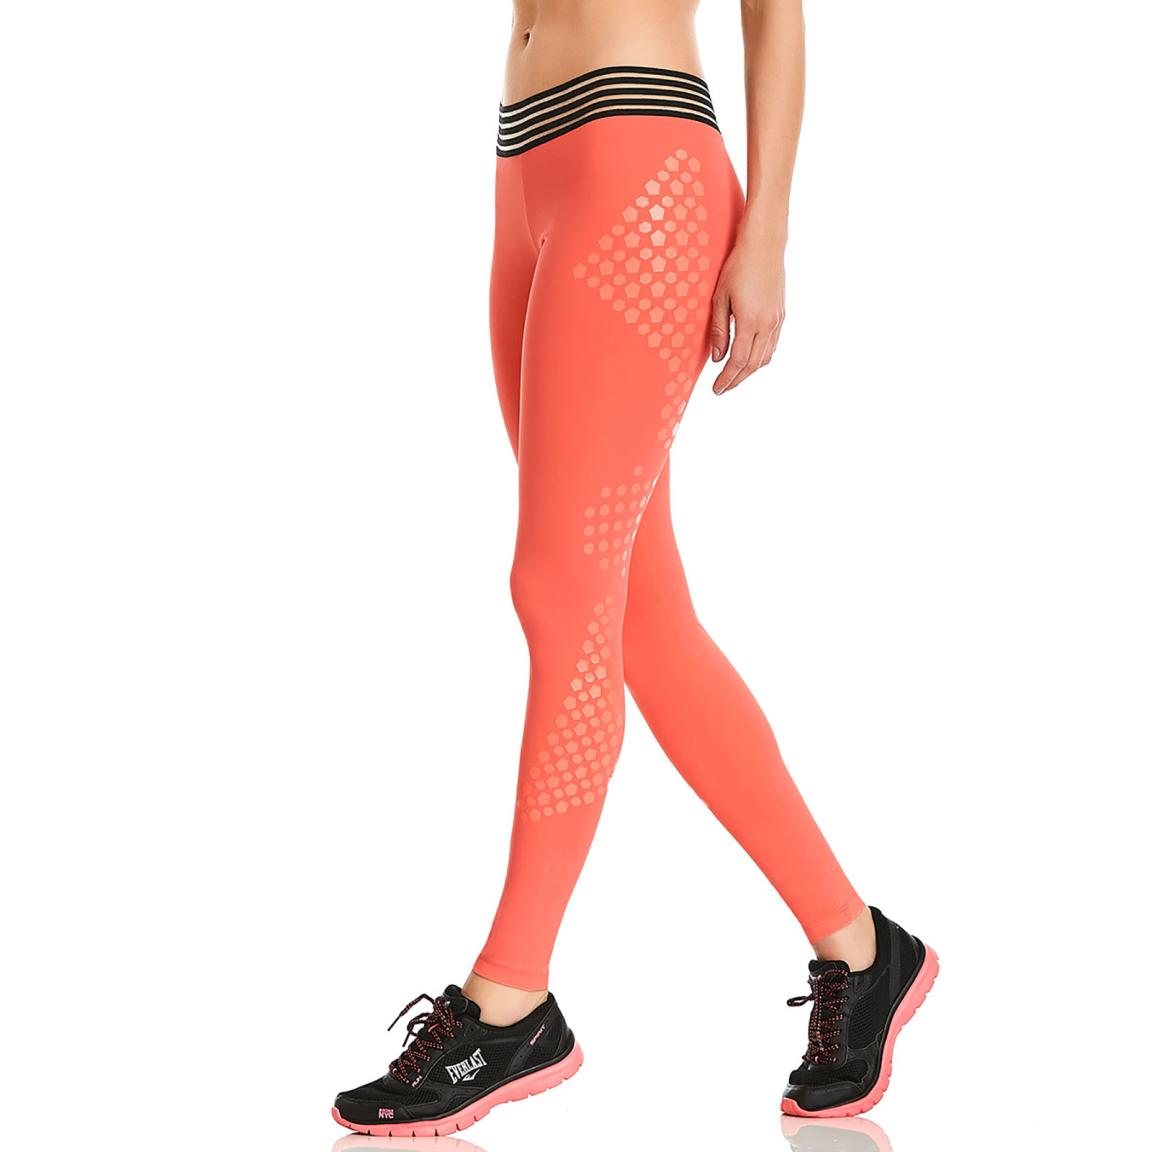 How To Choose The Right Activewear Fashion Fitness Leggings For My Body Type?